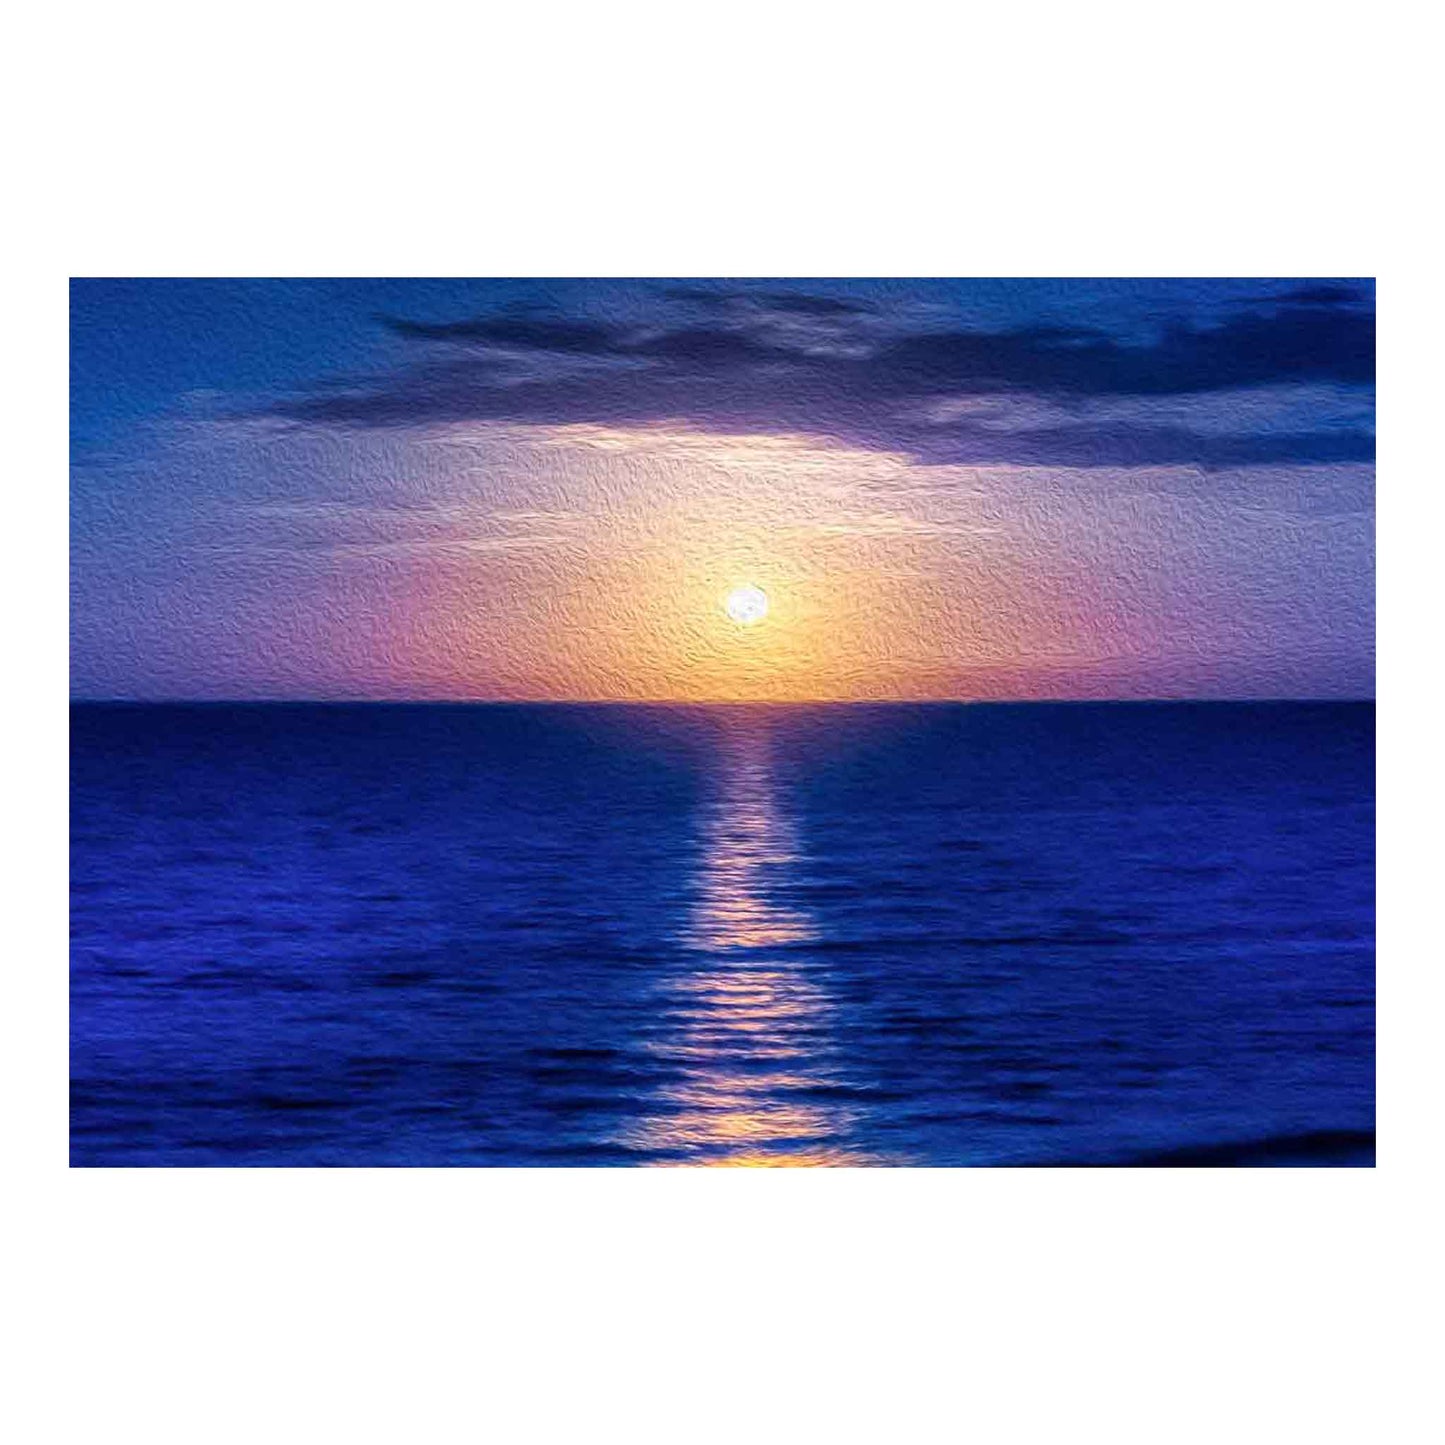 ECC "Blue Moon" Canvas Print - 8x10 inches, Original photograph by Photographer Claire Closson, Blues and violet with the orange glow of the moon rise. Canvas print is ready to hang.